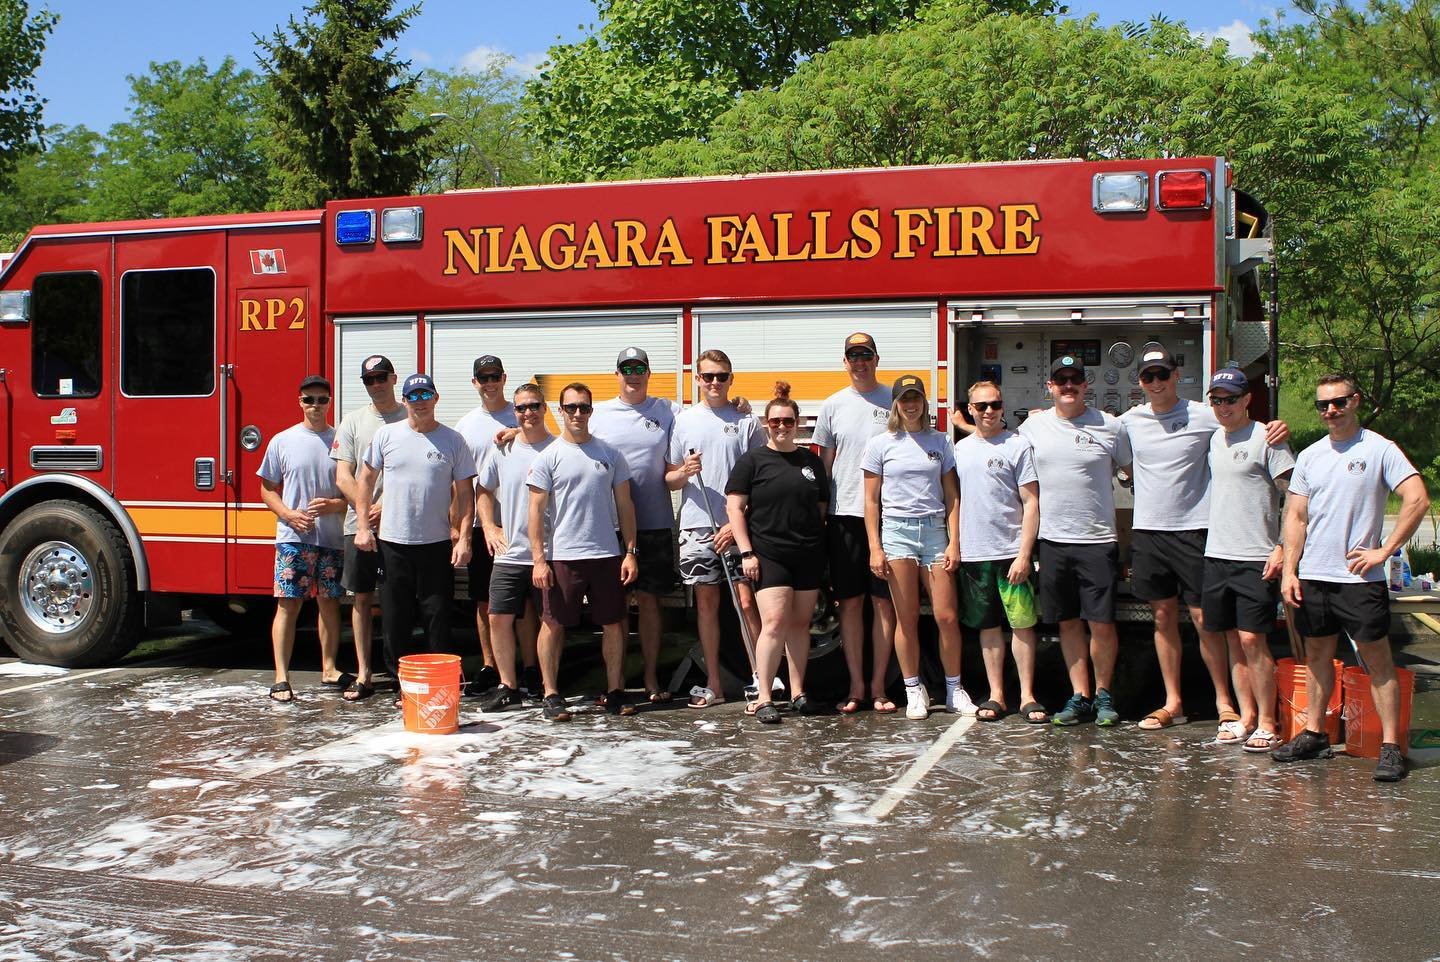 Another successful year at the @greatwolflodge car wash. This year we were able to help support @birchwayniagara and @gilliansplace_sc. The @nfpffa_local528 has been a big part of this event for over 10 years helping raise millions for deserving char